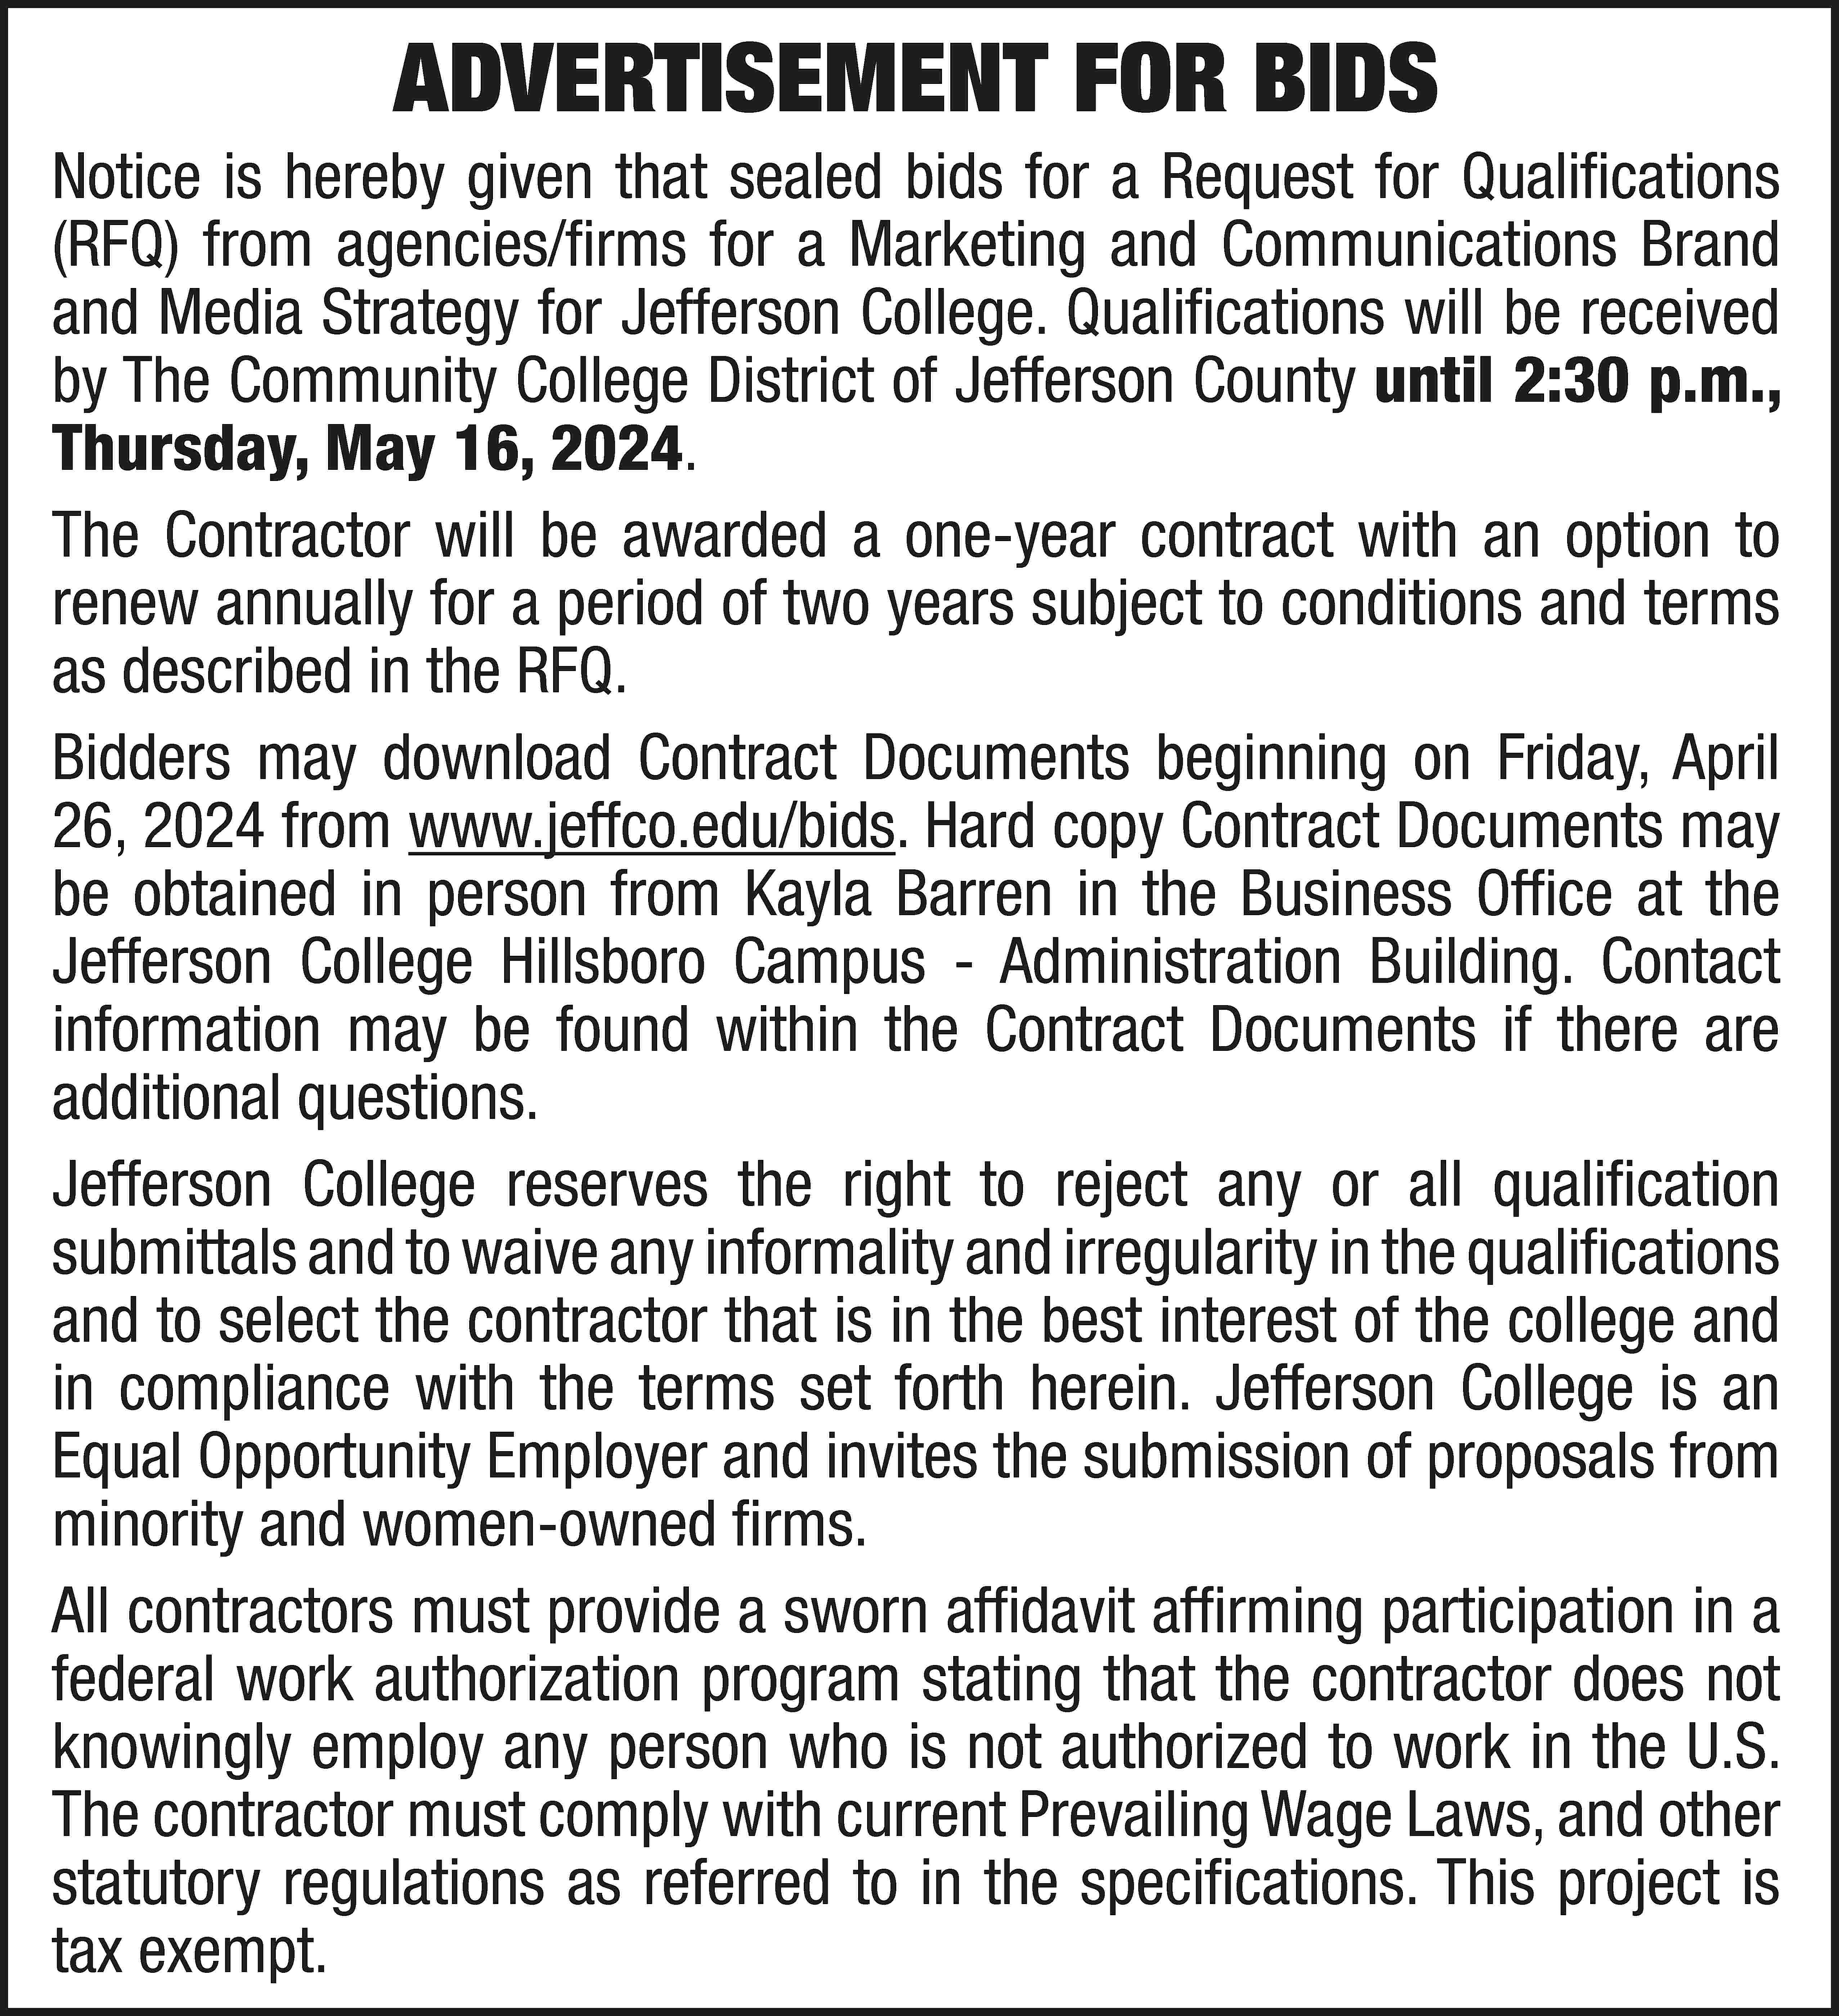 ADVERTISEMENT FOR BIDS Notice is  ADVERTISEMENT FOR BIDS Notice is hereby given that sealed bids for a Request for Qualifications (RFQ) from agencies/firms for a Marketing and Communications Brand and Media Strategy for Jefferson College. Qualifications will be received by The Community College District of Jefferson County until 2:30 p.m., Thursday, May 16, 2024. The Contractor will be awarded a one-year contract with an option to renew annually for a period of two years subject to conditions and terms as described in the RFQ. Bidders may download Contract Documents beginning on Friday, April 26, 2024 from www.jeffco.edu/bids. Hard copy Contract Documents may be obtained in person from Kayla Barren in the Business Office at the Jefferson College Hillsboro Campus - Administration Building. Contact information may be found within the Contract Documents if there are additional questions. Jefferson College reserves the right to reject any or all qualification submittals and to waive any informality and irregularity in the qualifications and to select the contractor that is in the best interest of the college and in compliance with the terms set forth herein. Jefferson College is an Equal Opportunity Employer and invites the submission of proposals from minority and women-owned firms. All contractors must provide a sworn affidavit affirming participation in a federal work authorization program stating that the contractor does not knowingly employ any person who is not authorized to work in the U.S. The contractor must comply with current Prevailing Wage Laws, and other statutory regulations as referred to in the specifications. This project is tax exempt.